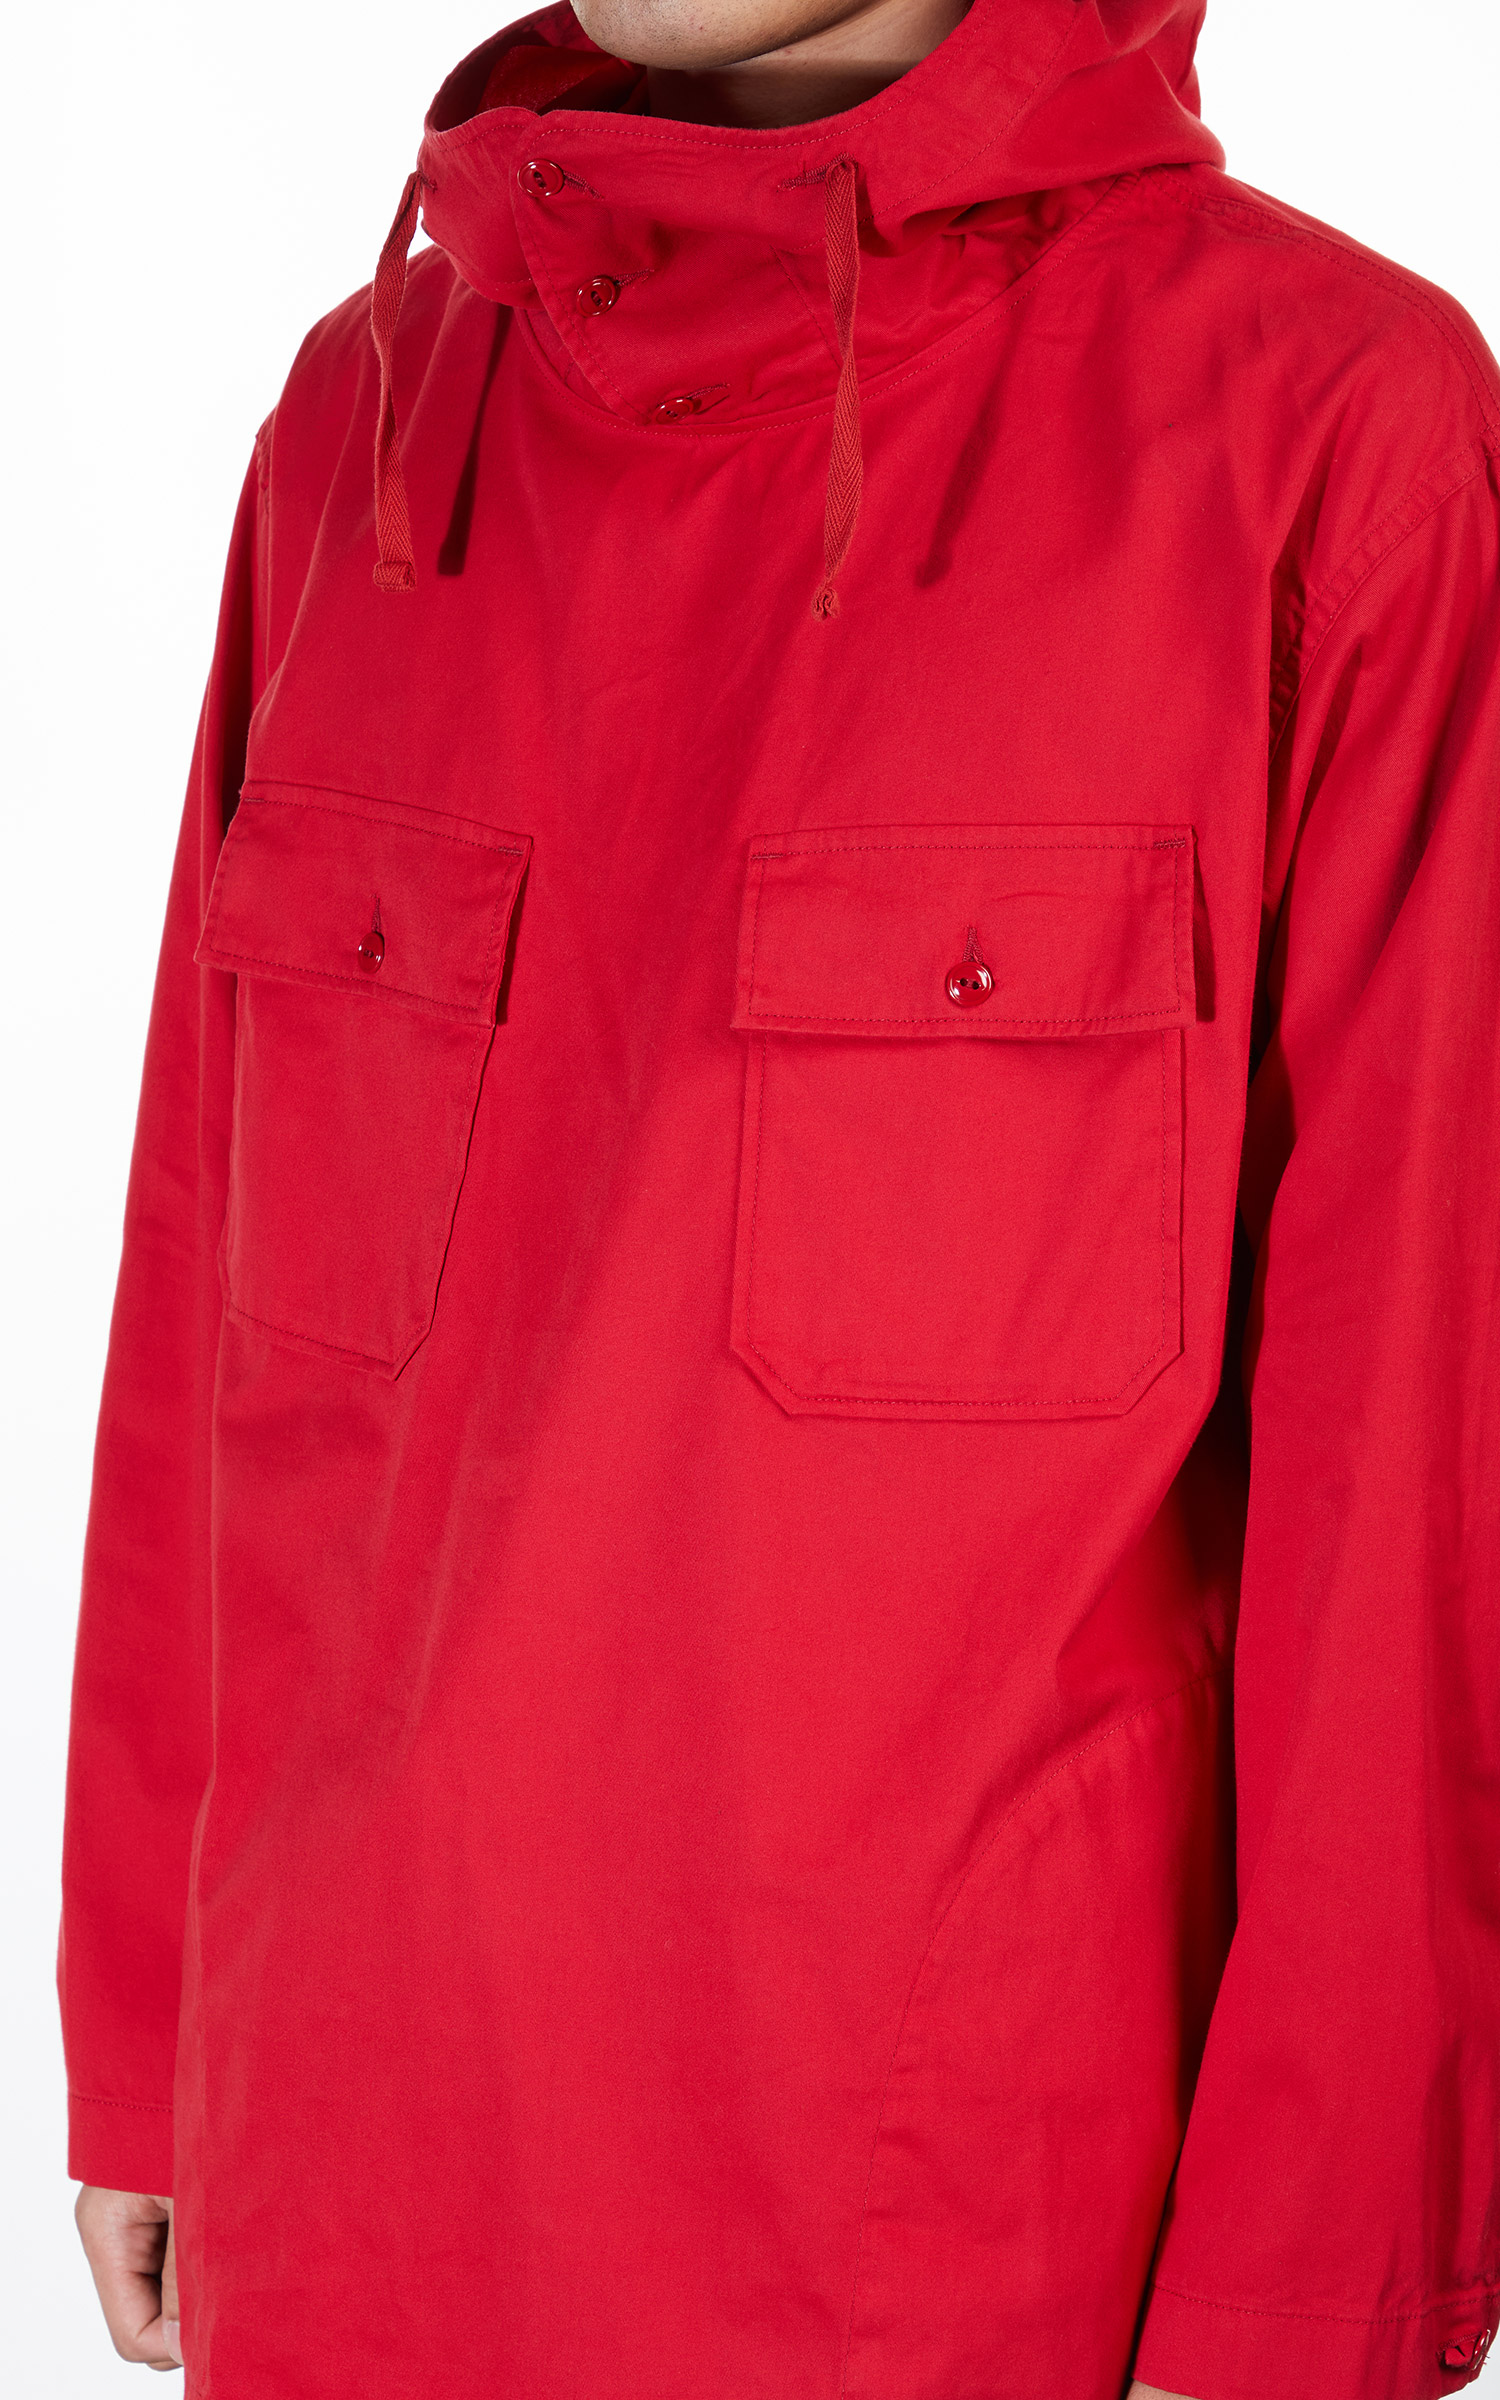 Engineered Garments Cagoule Shirt Red Cotton Micro Sanded Twill | Cultizm